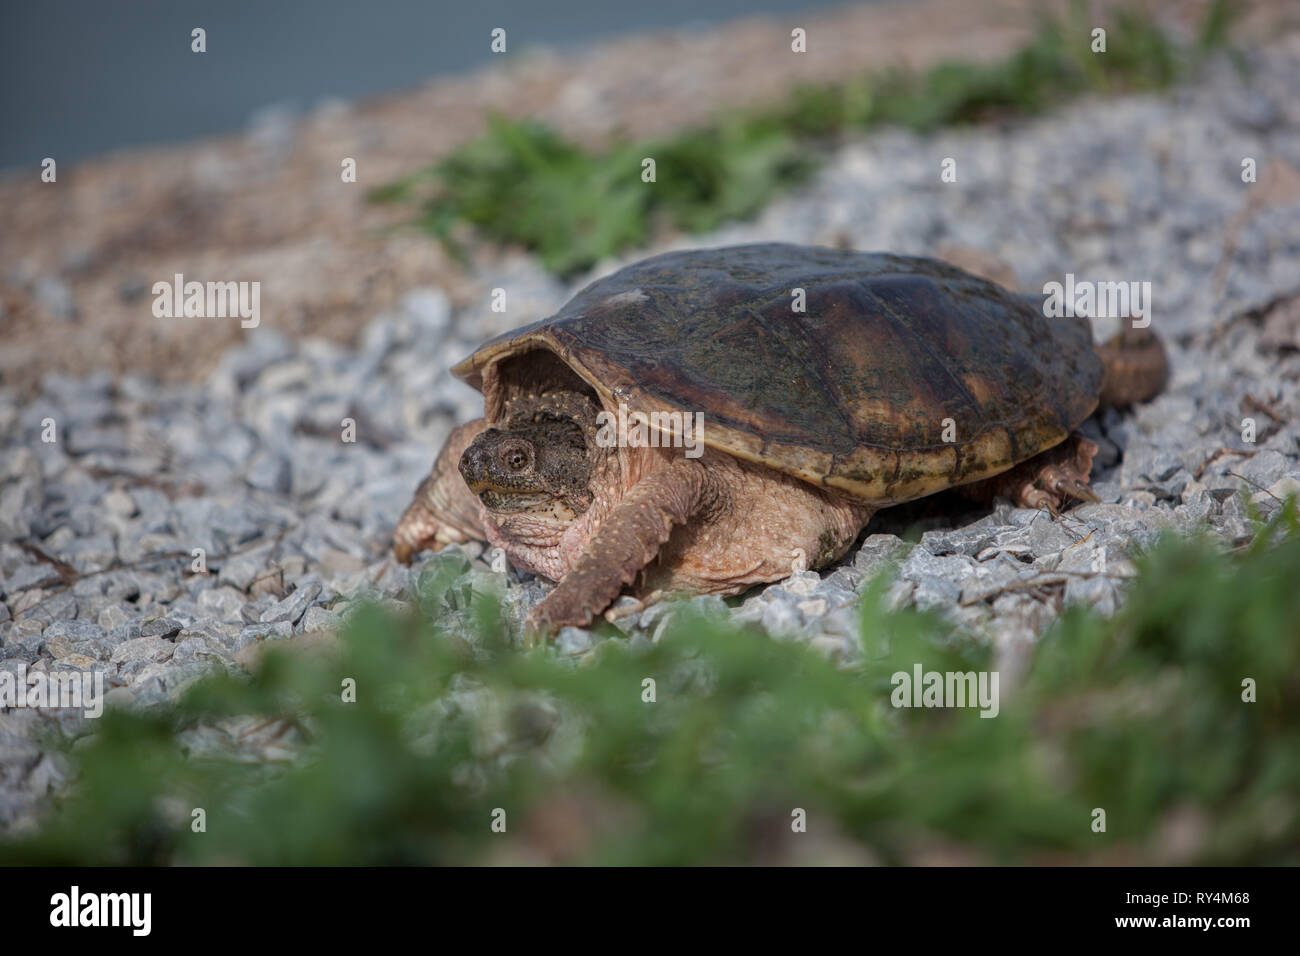 Nature Reptiles Shelled Wildlife Snapping Turtle Still Rocky Pebbles Stock Photo